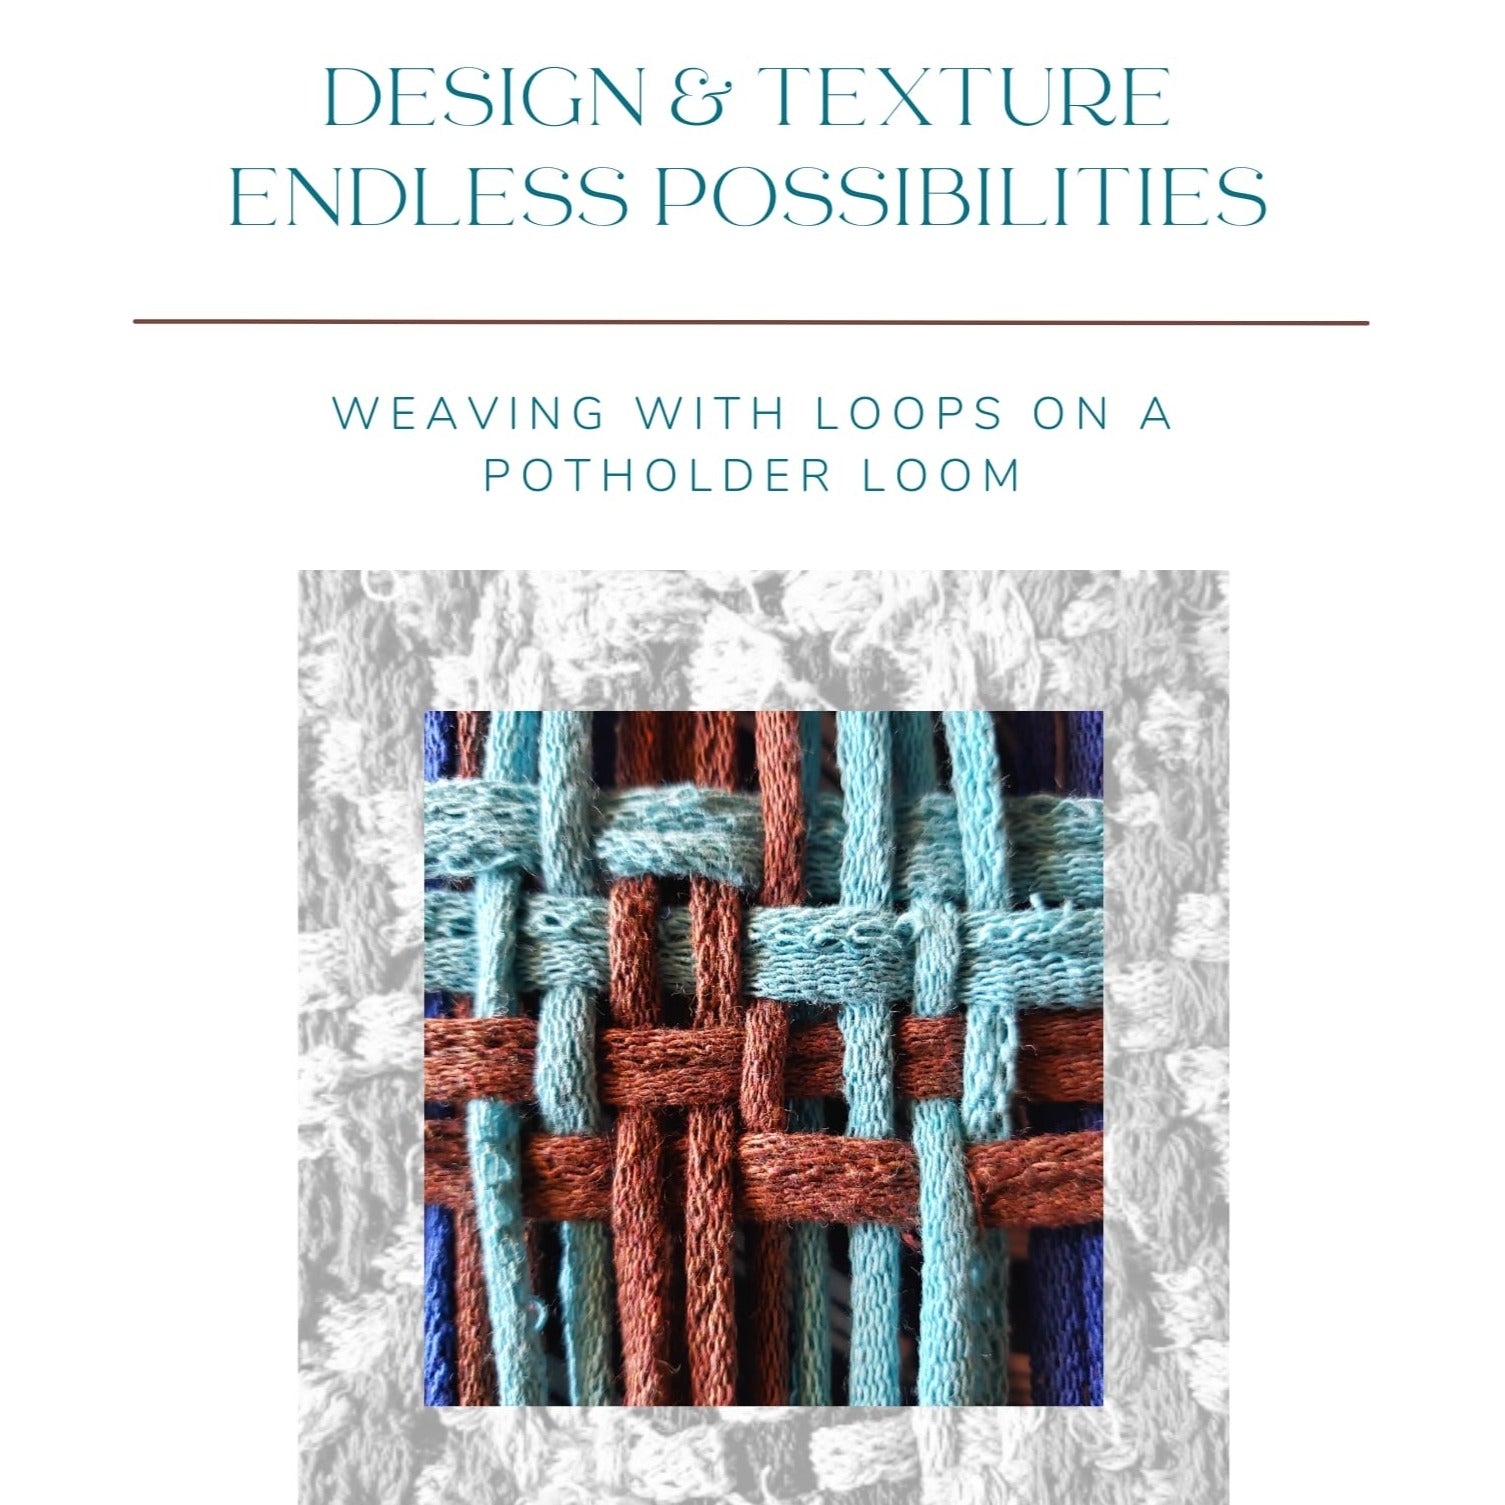 Design & Texture Endless Possibilities by Linda Lutomski – Friendly Loom